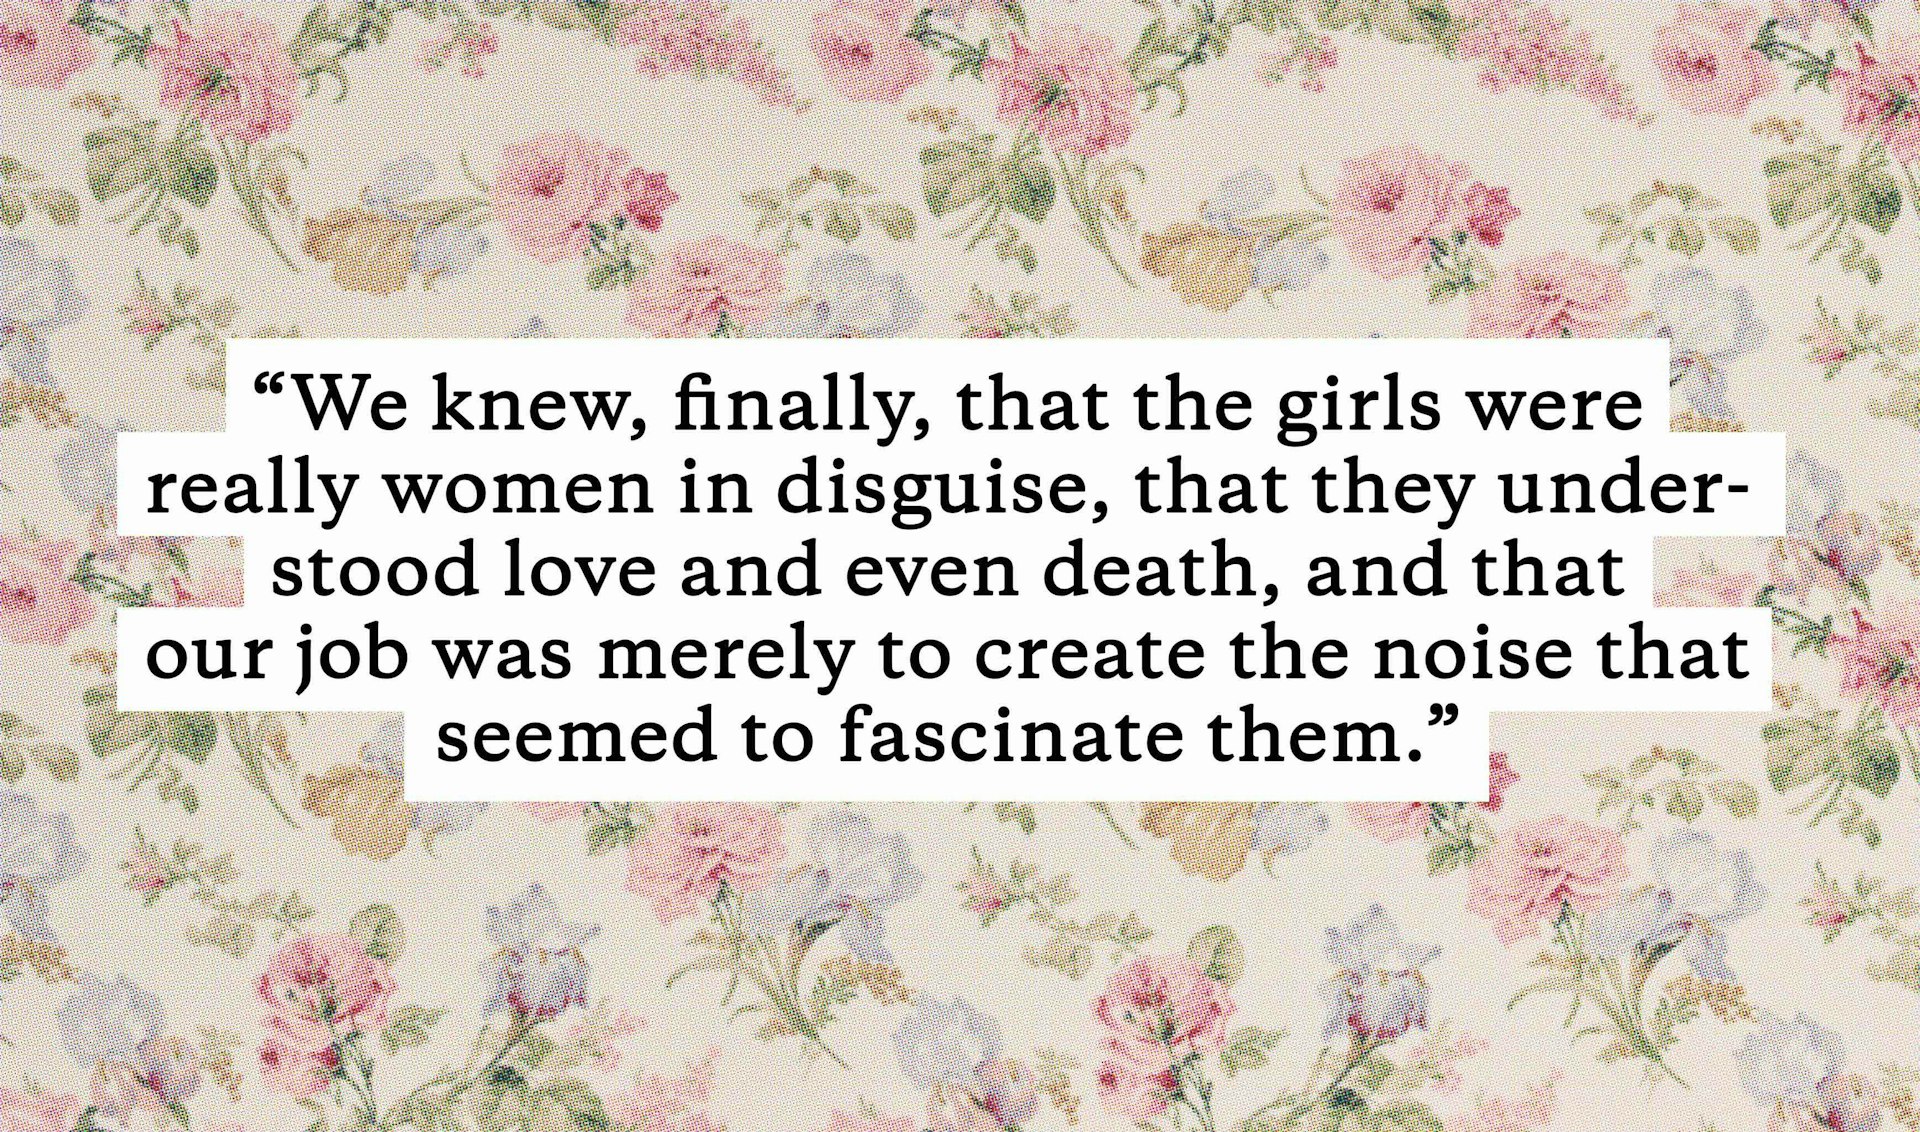 What the The Virgin Suicides taught me about life & love